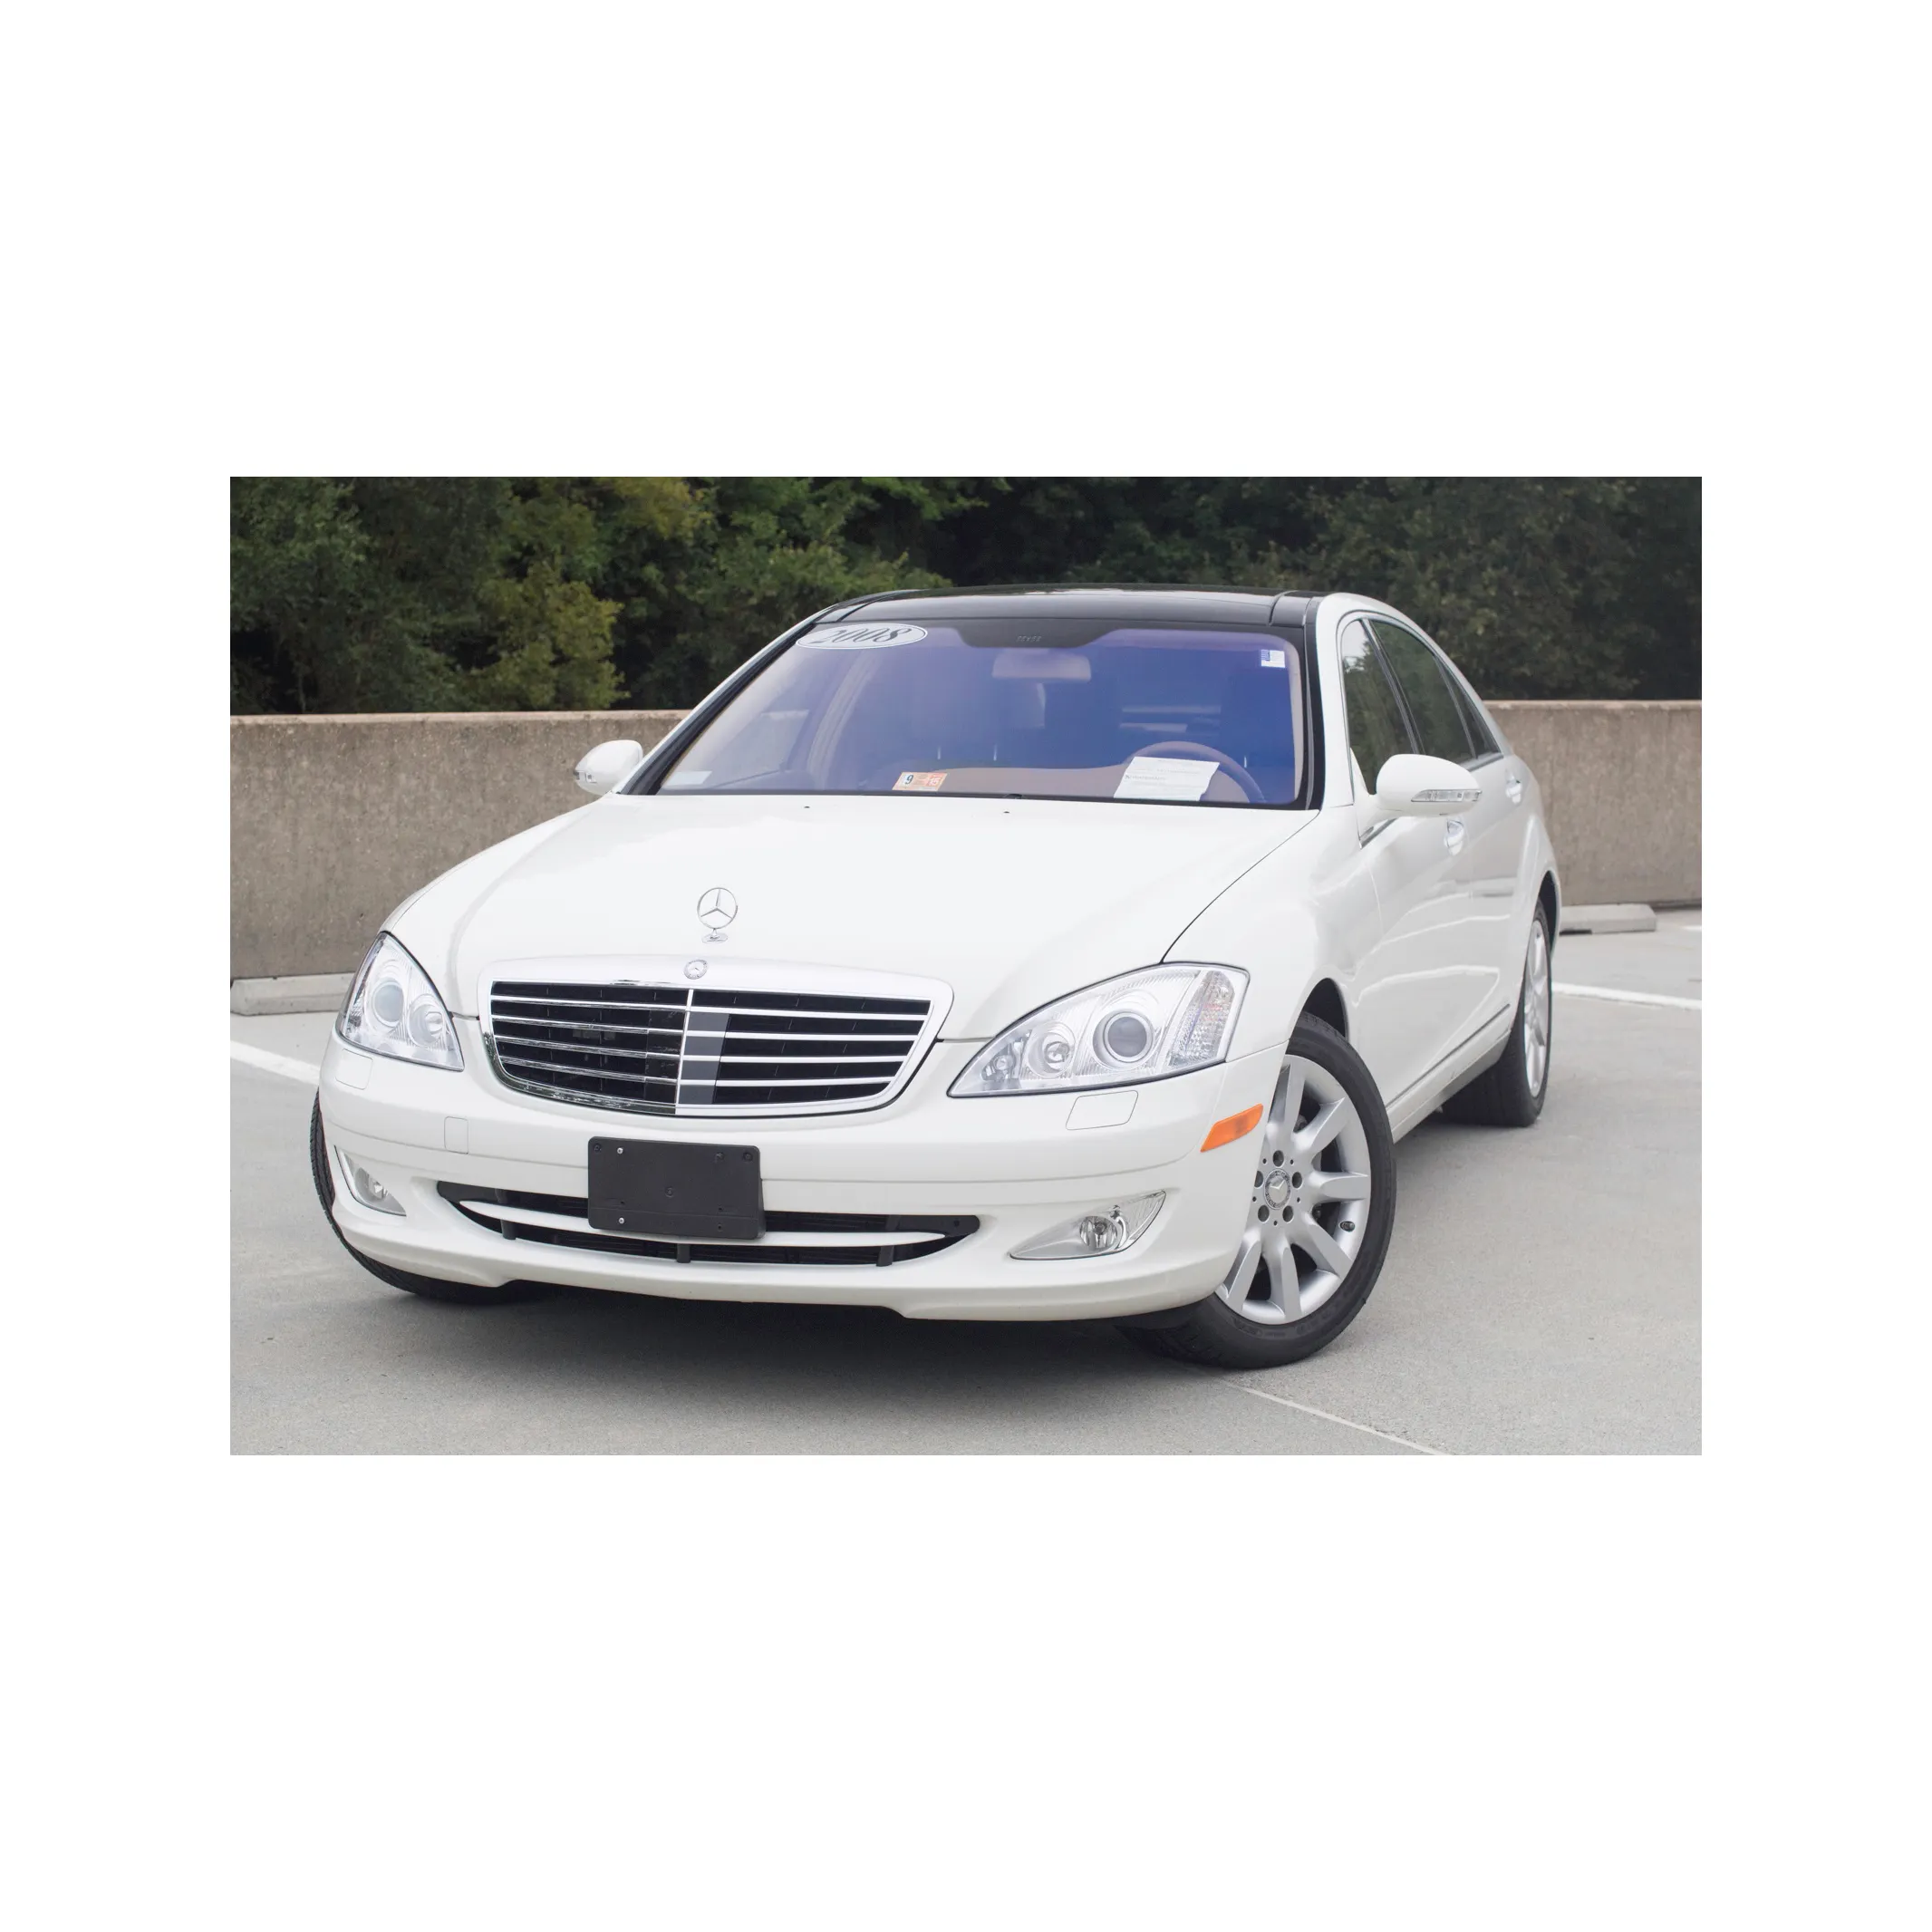 Mercedes-Benz S-Class Mercedes Benz Year in good shape for sale